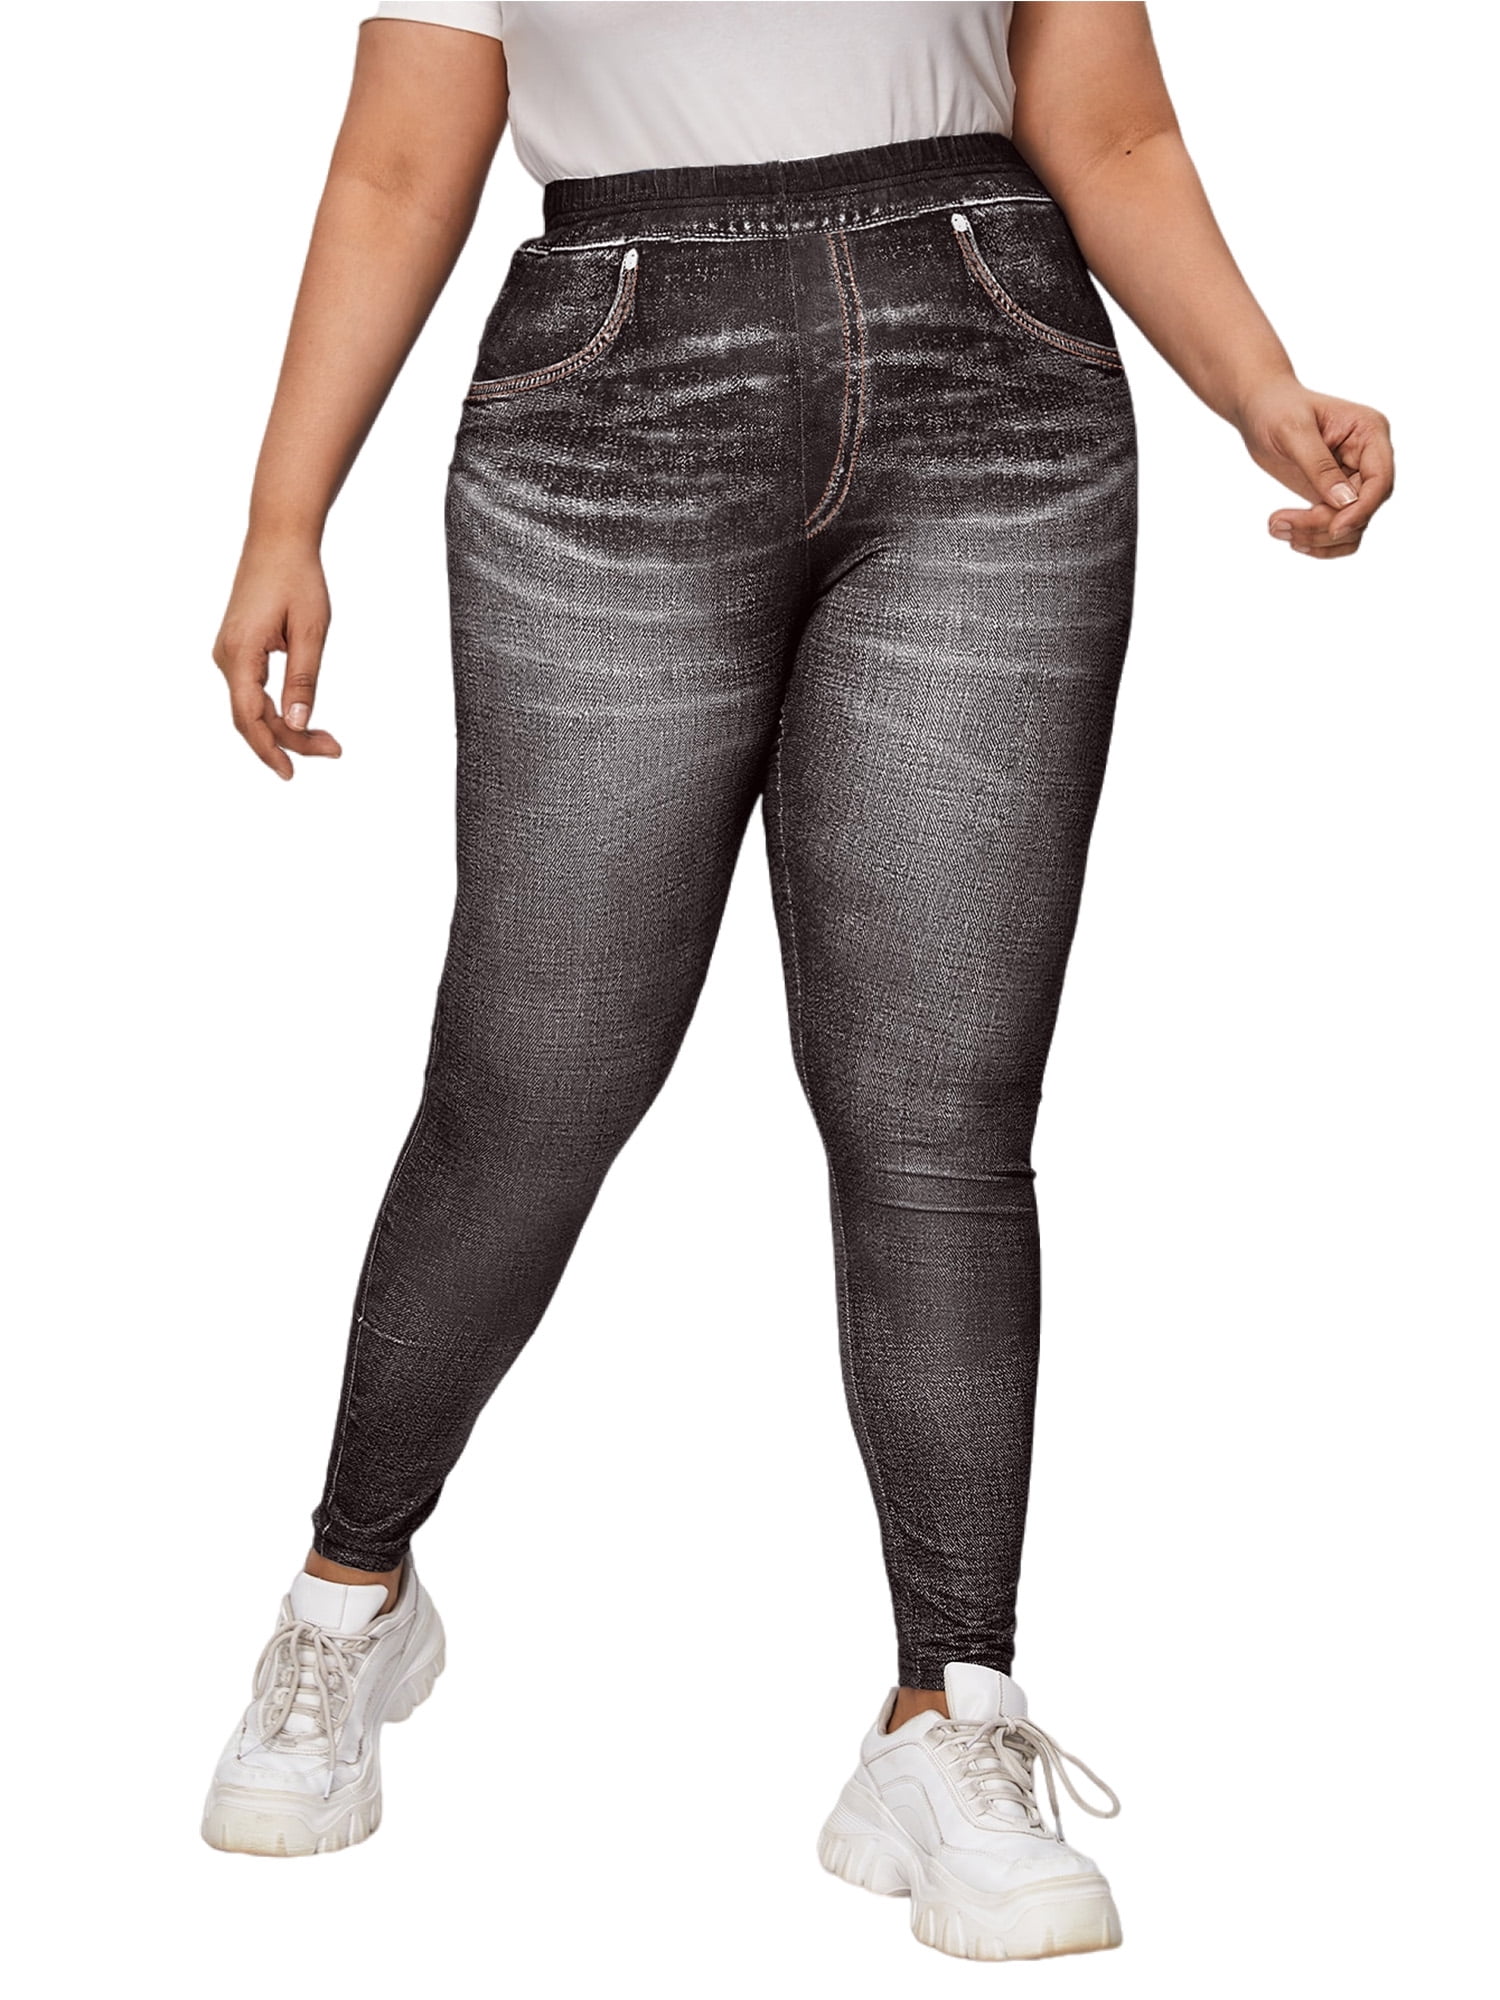 Frontwalk Plus Size Leggings for Women High Waist Printed Denim Stretch  Faux Jeans Look Print Jeggings with Pockets Blue 2XL